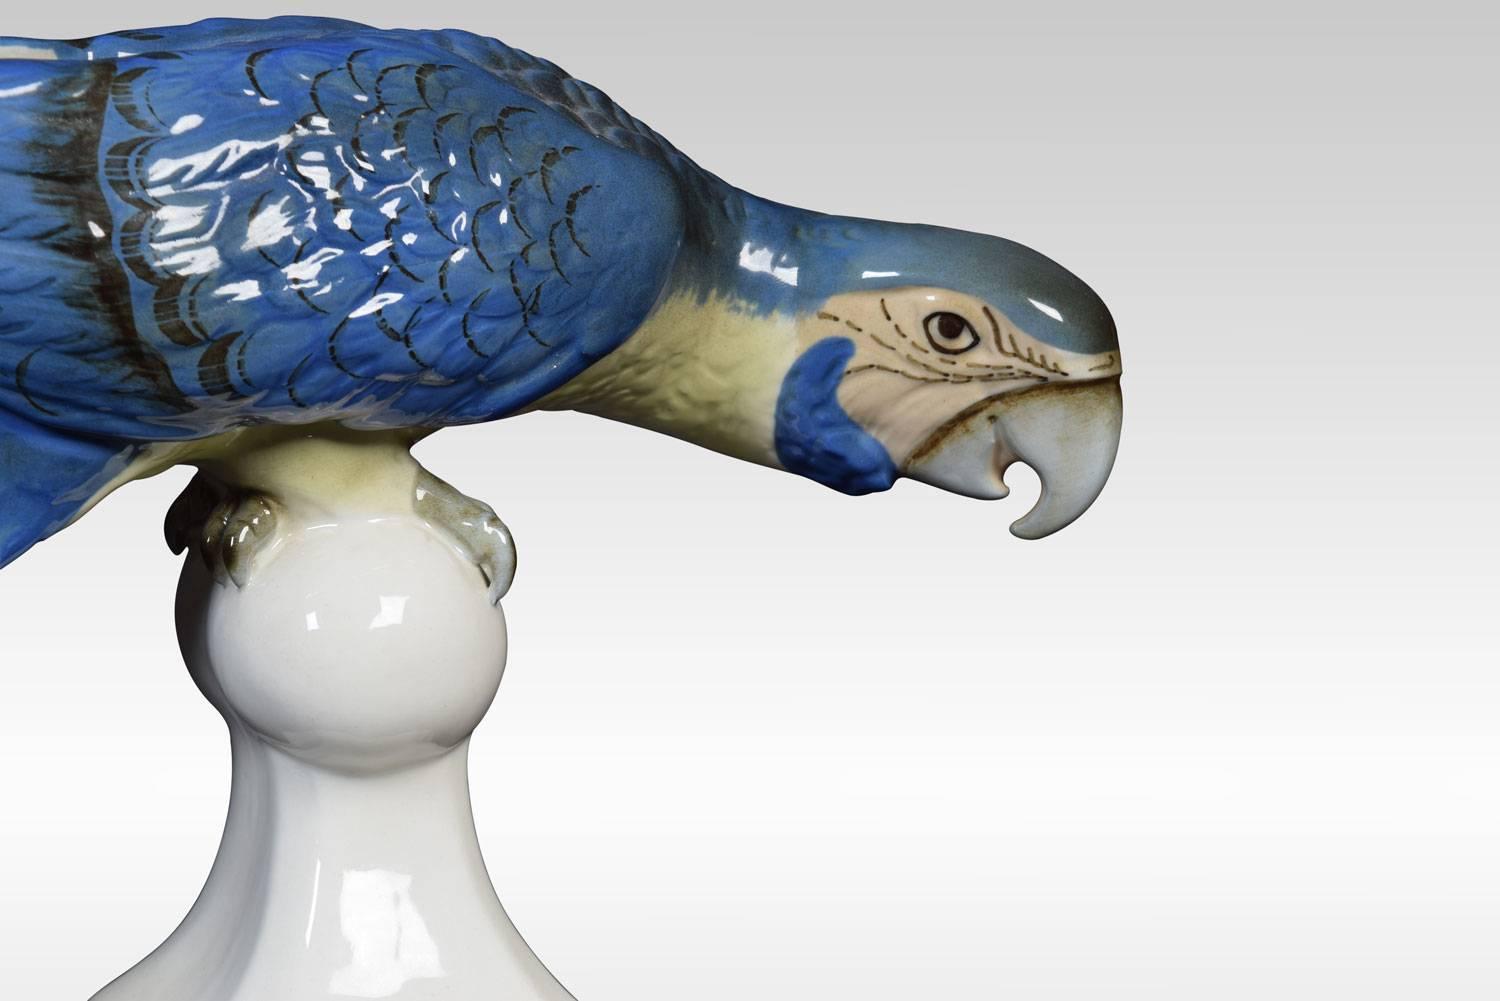 Royal dux ceramic statue of a blue macaw, perched on a stand in typical inquisitive stance. Having a pink triangle to base, together with printed and impressed marks.

Dimensions:

Height 8.5 inches

Width 5 inches

Depth 17 inches.